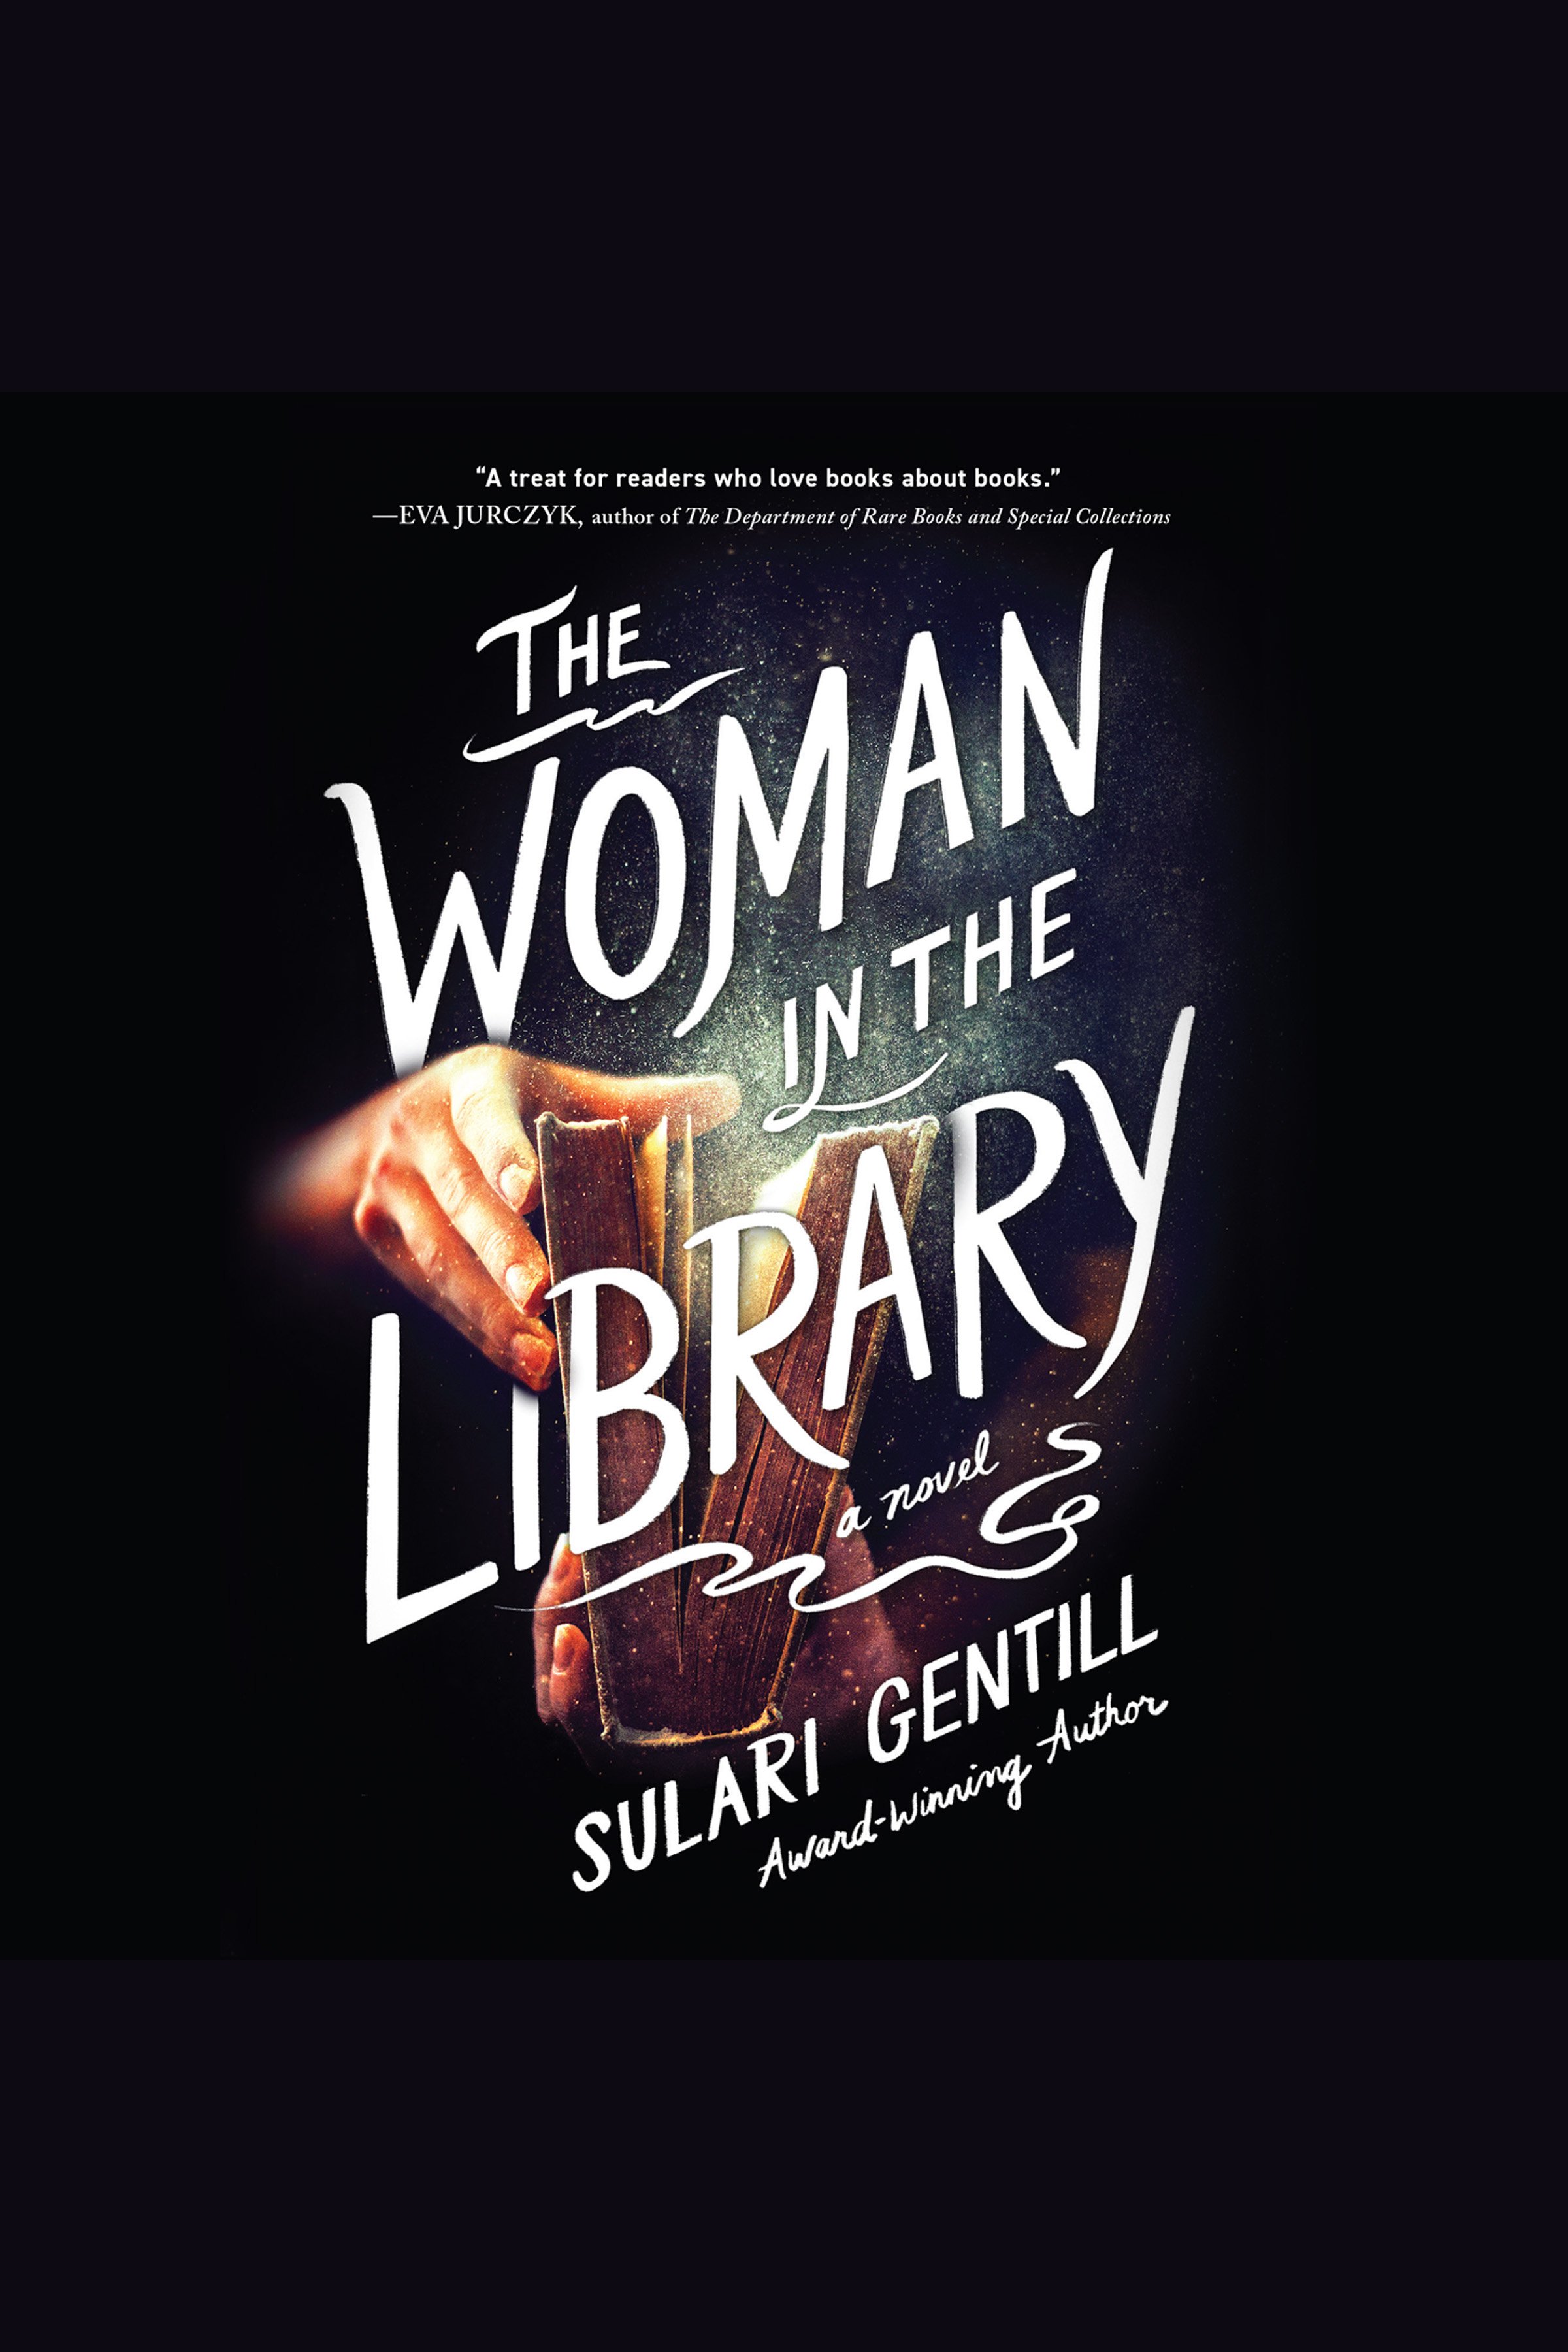 The Woman in the Library cover image